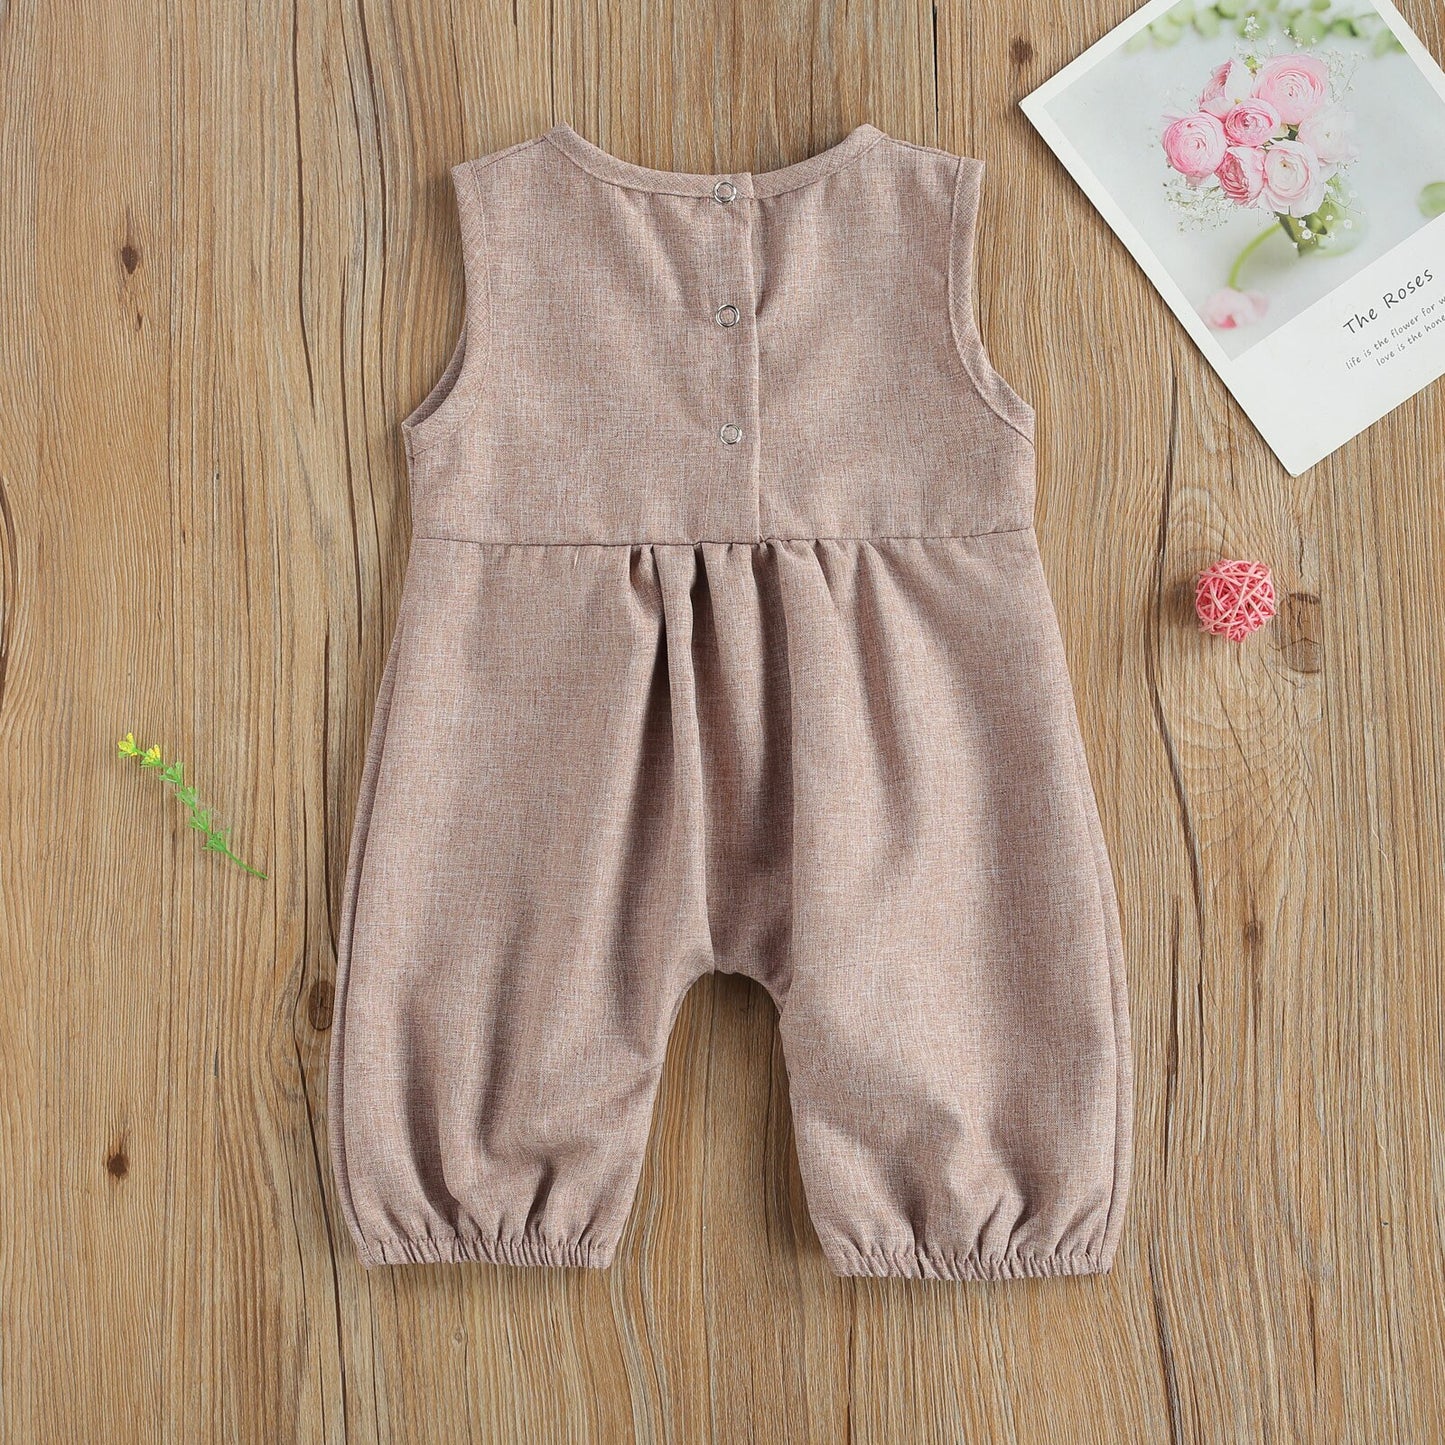 Baby Romper/Clothes Sets Rainbow Print Tops Shorts/Sleeveless Jumpsuits